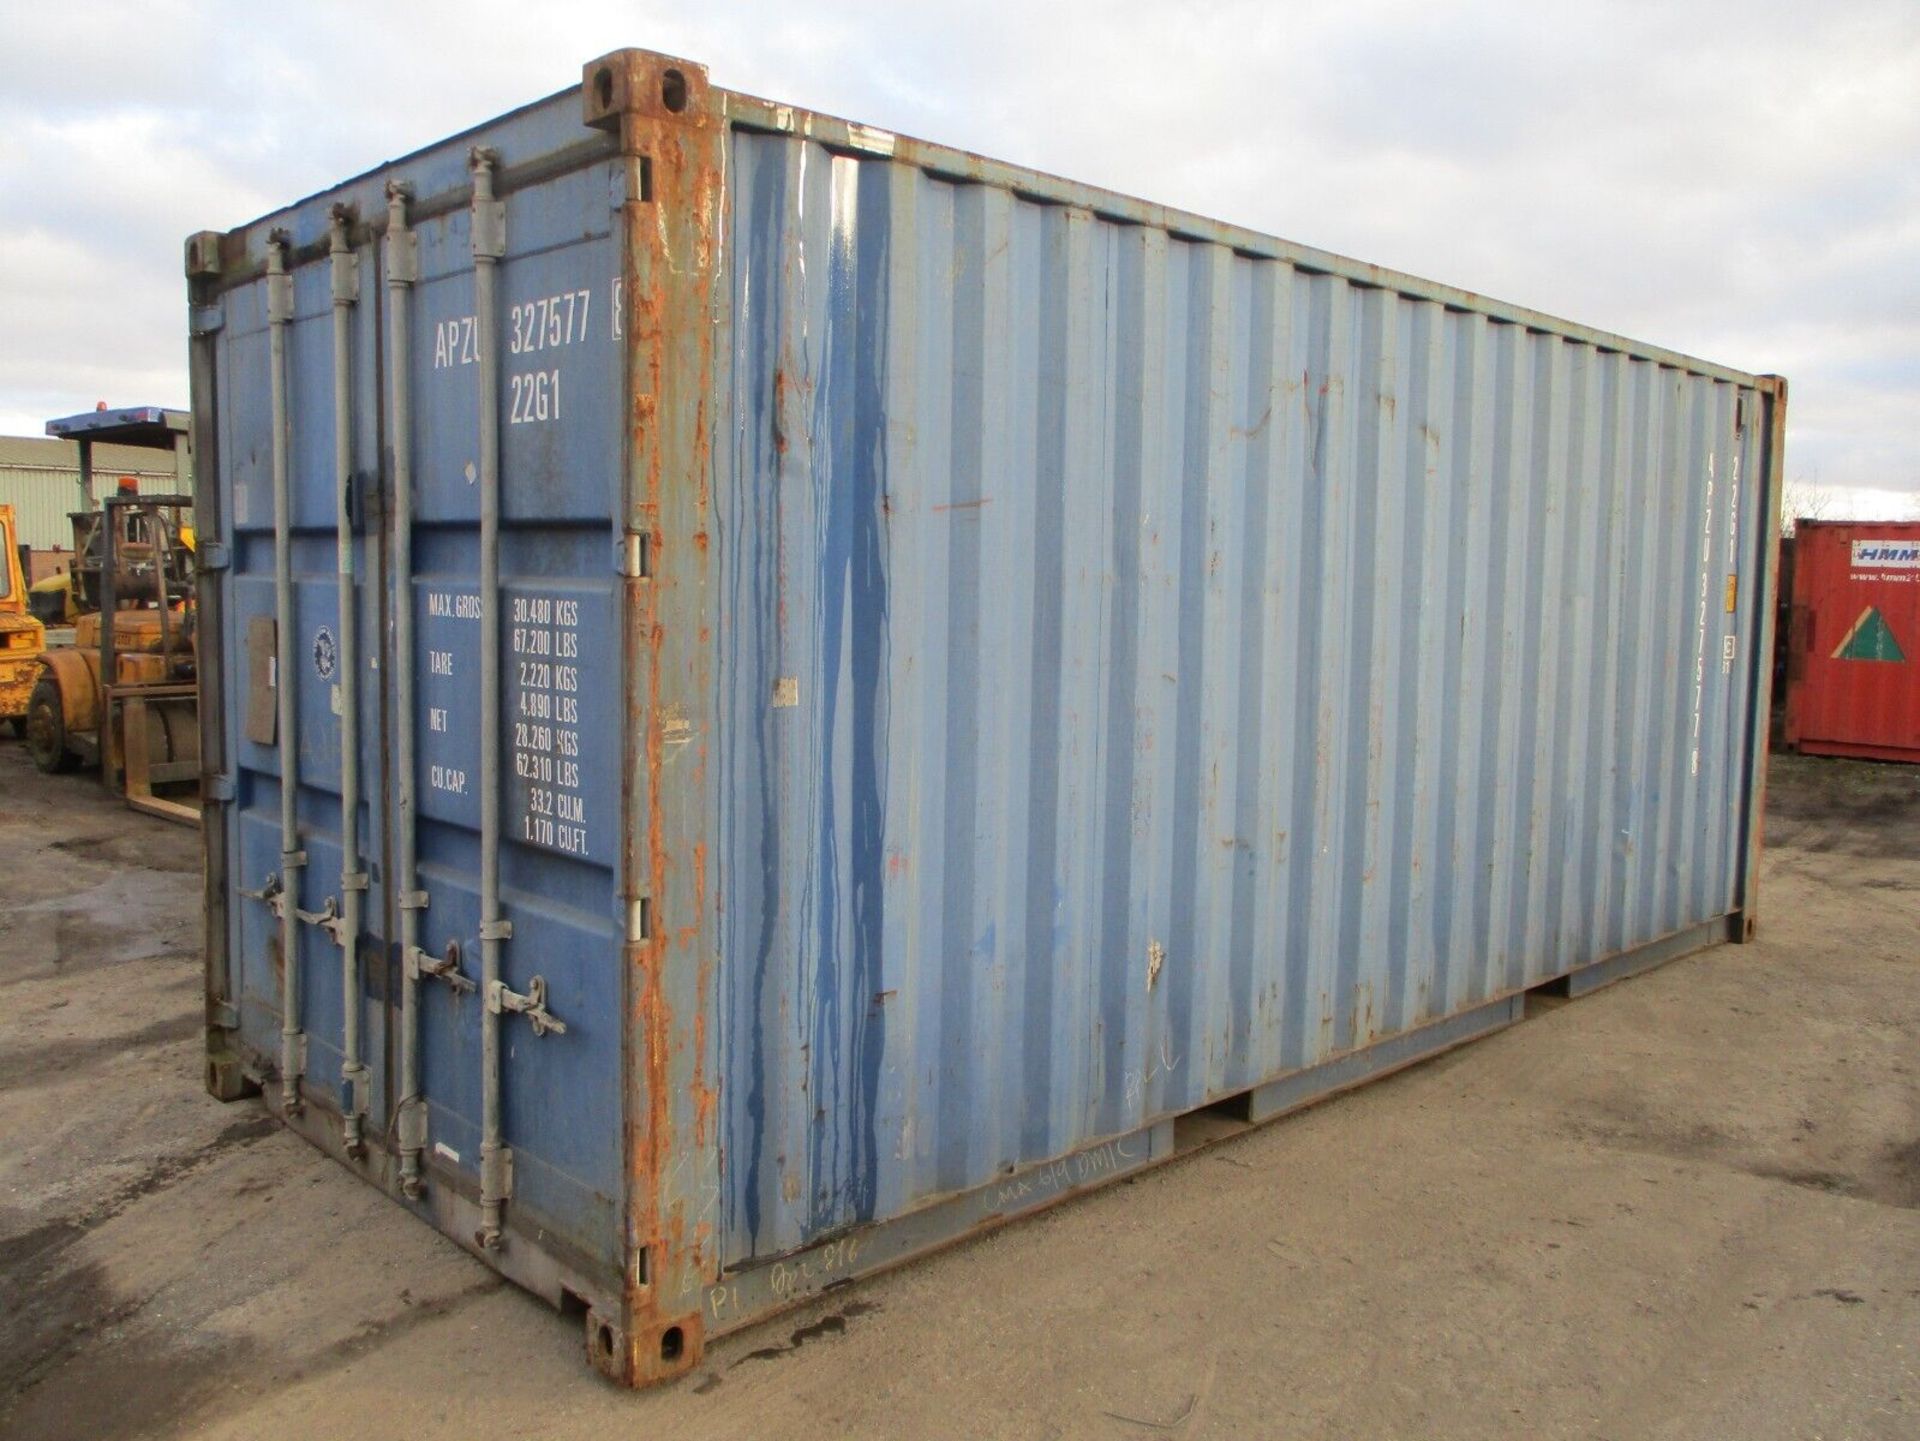 SHIPPING CONTAINER 20 FEET LONG X 8 FEET WIDE - Image 4 of 9